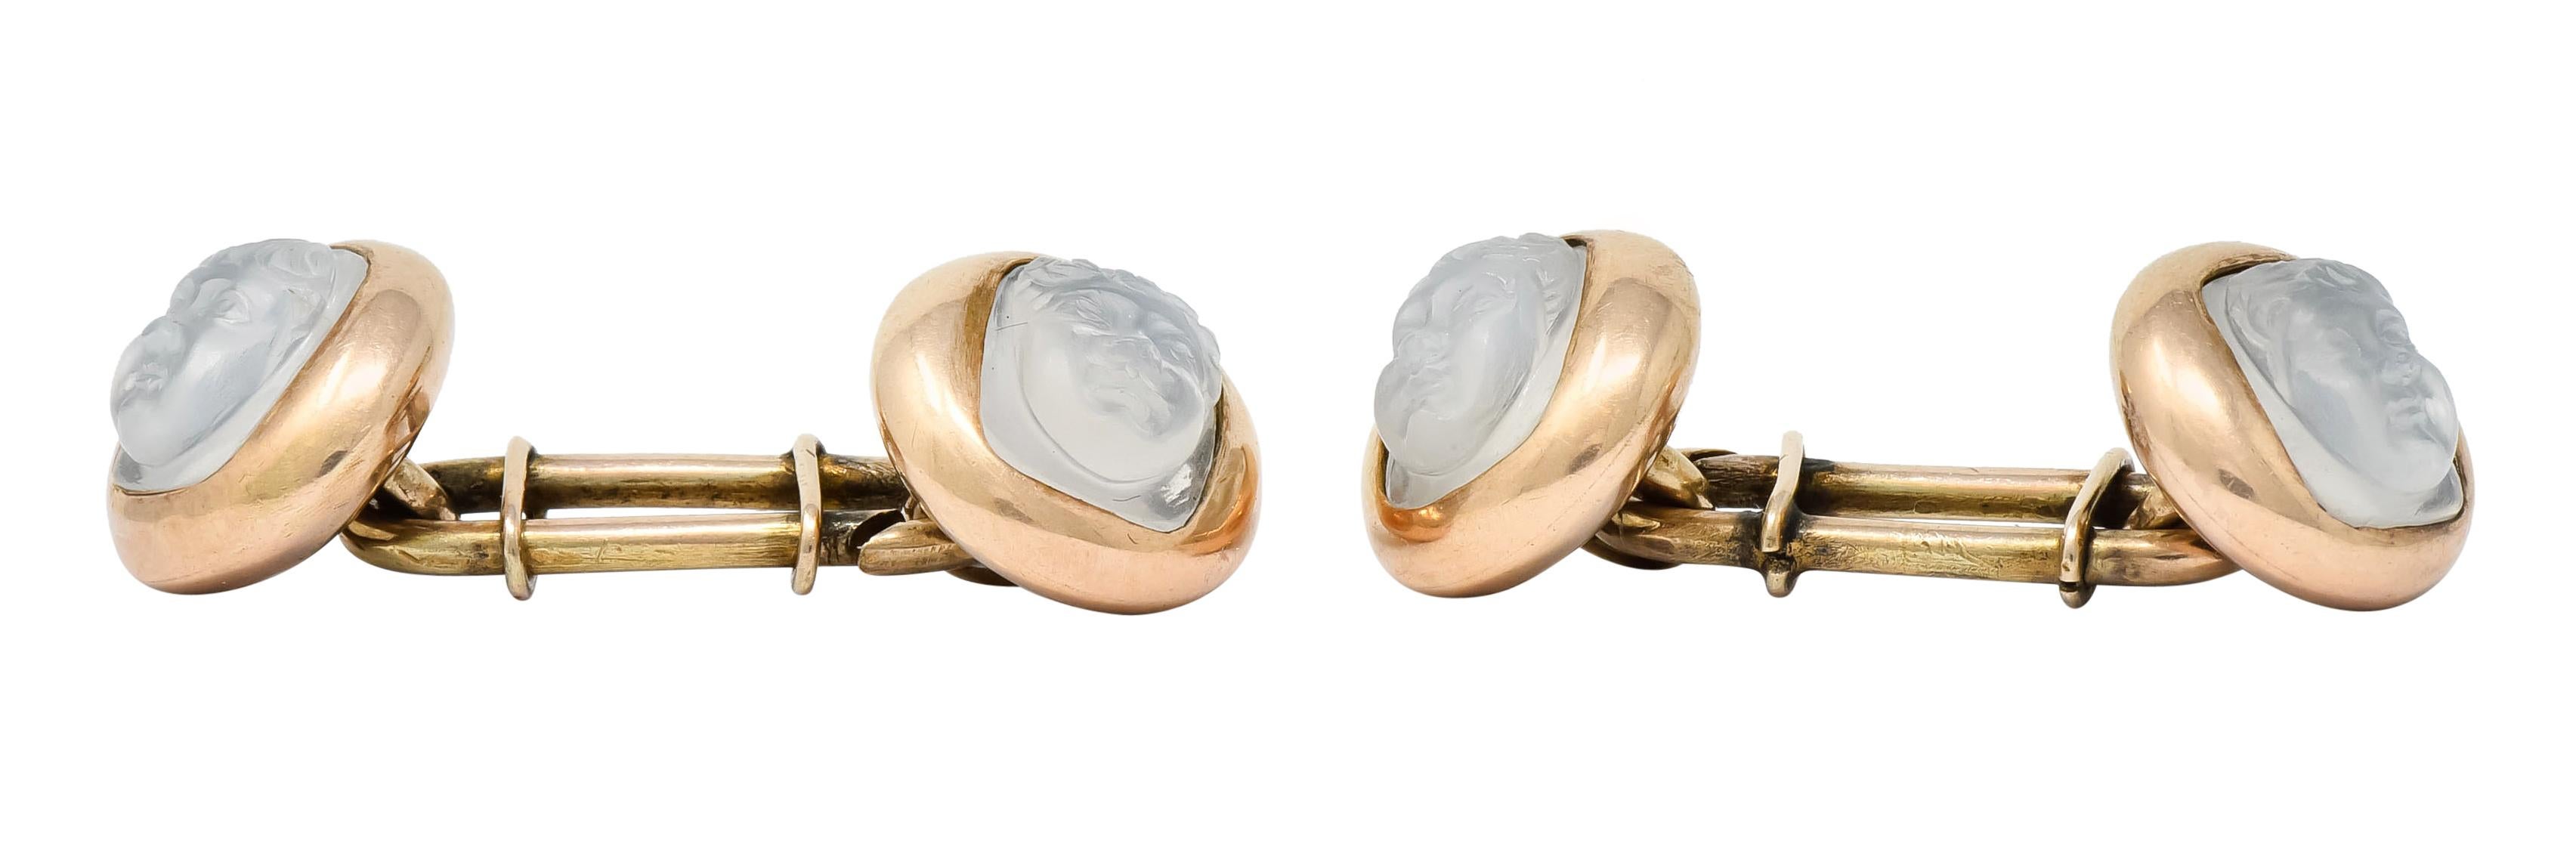 Link style cufflinks terminating on each end as a delicately carved moonstone to depict a highly rendered child's face

Moonstone is translucent with strong billowy white adularescence and is bezel set in a polished gold circular surround

Tested as